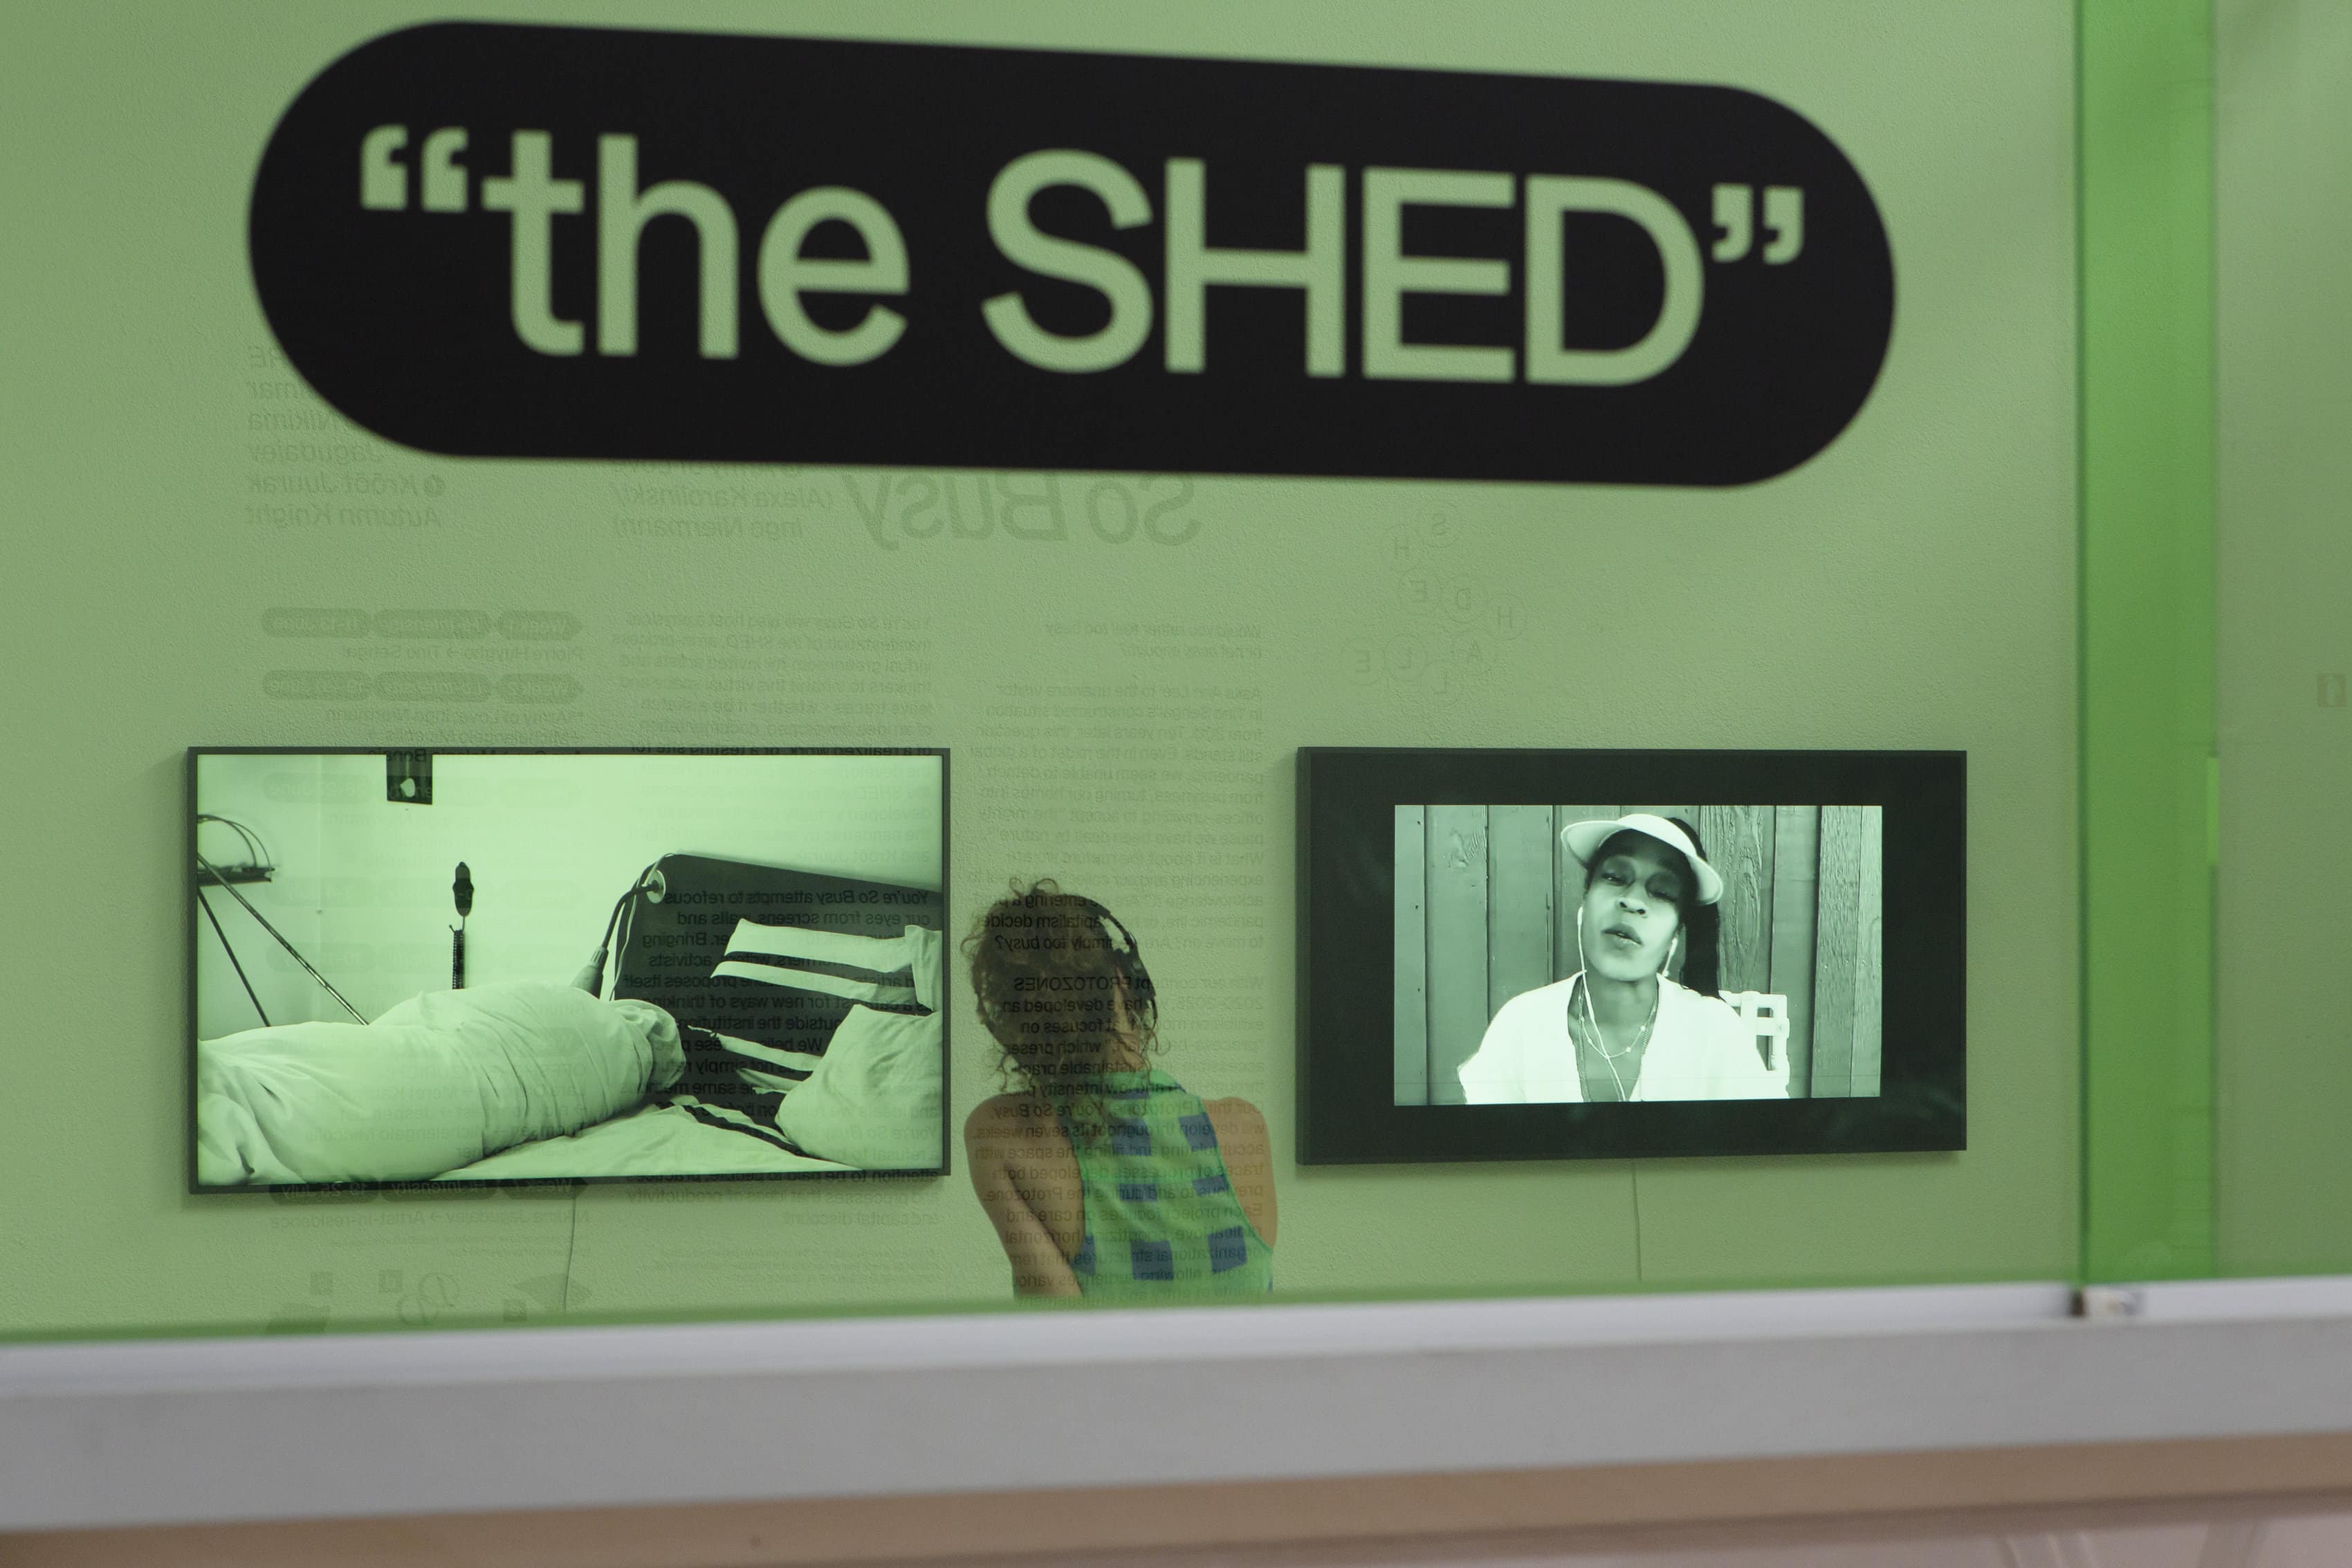 Shedhalle – the SHED